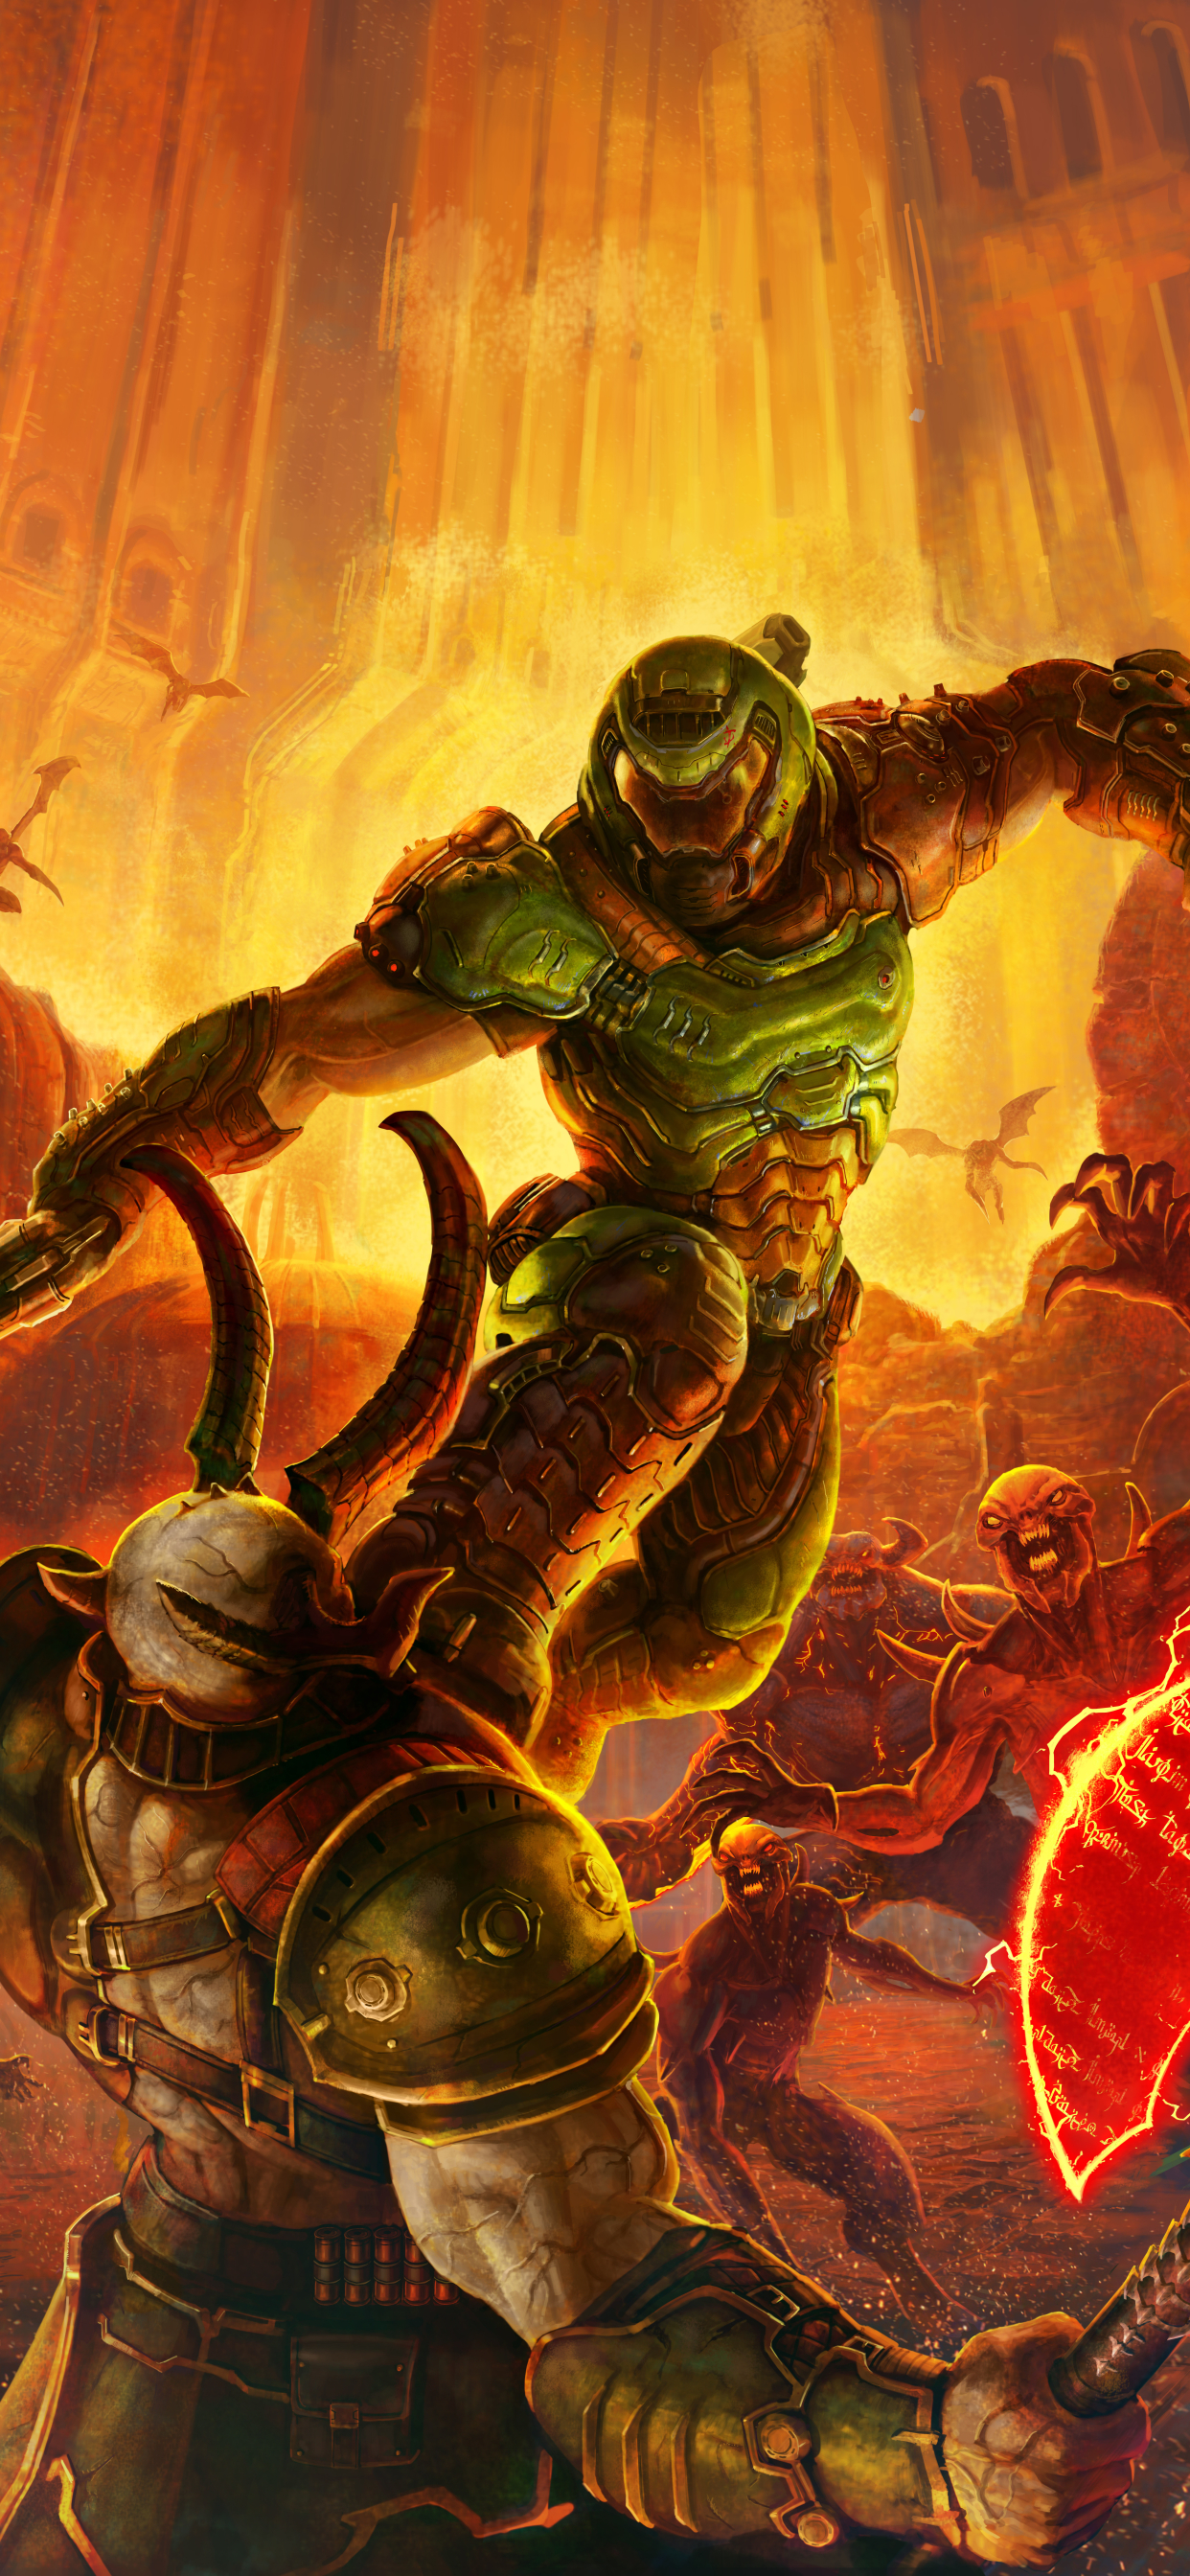 Download Doom wallpapers for mobile phone free Doom HD pictures